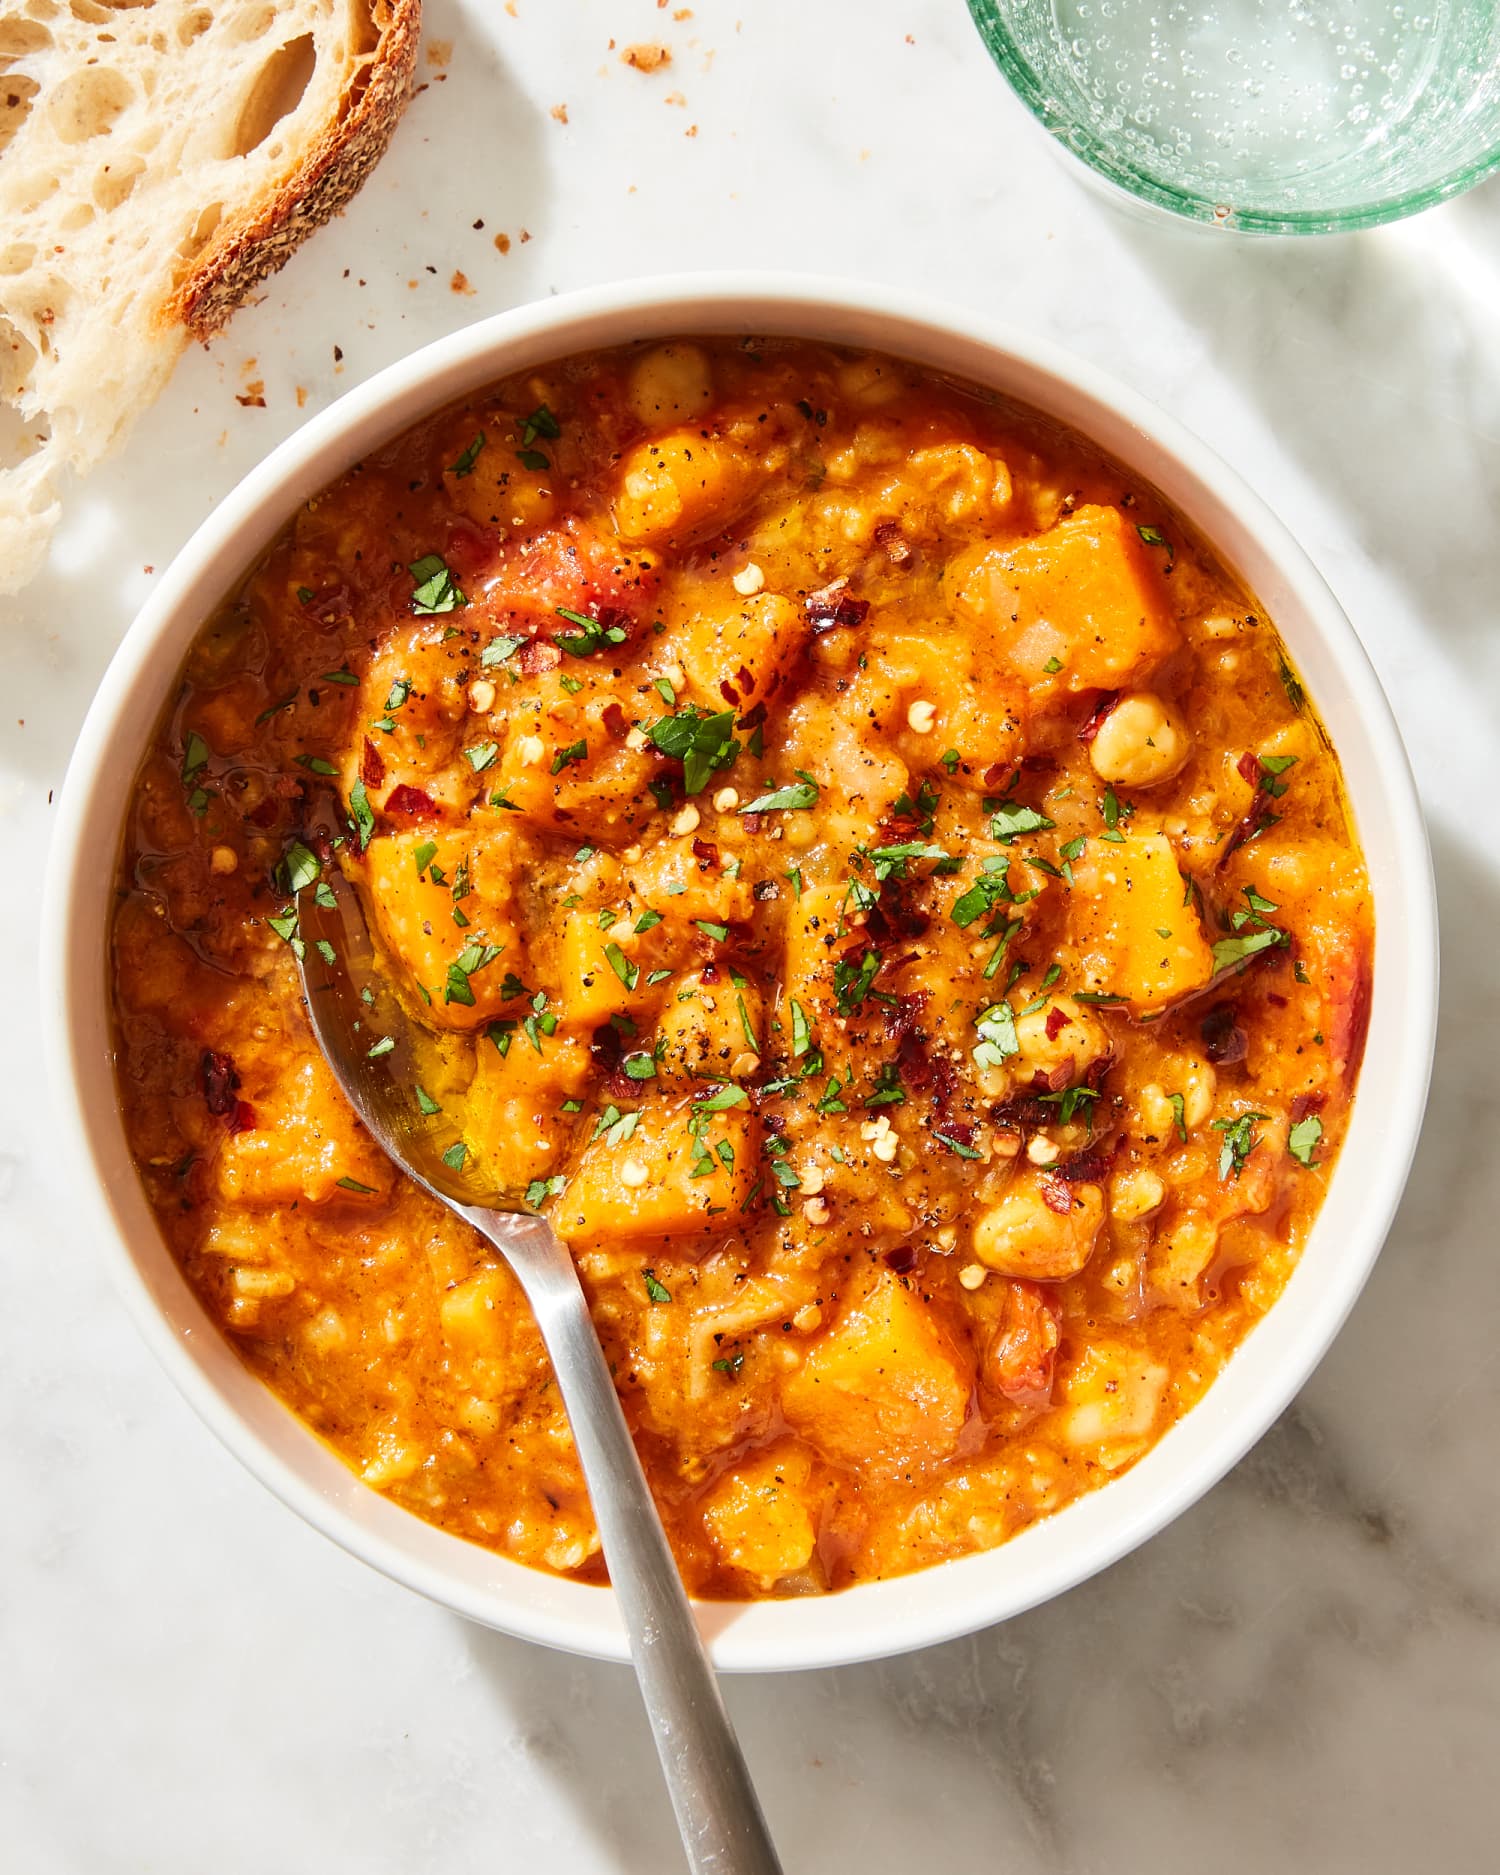 My Moroccan Chickpea Stew Is Pure Comfort in a Bowl